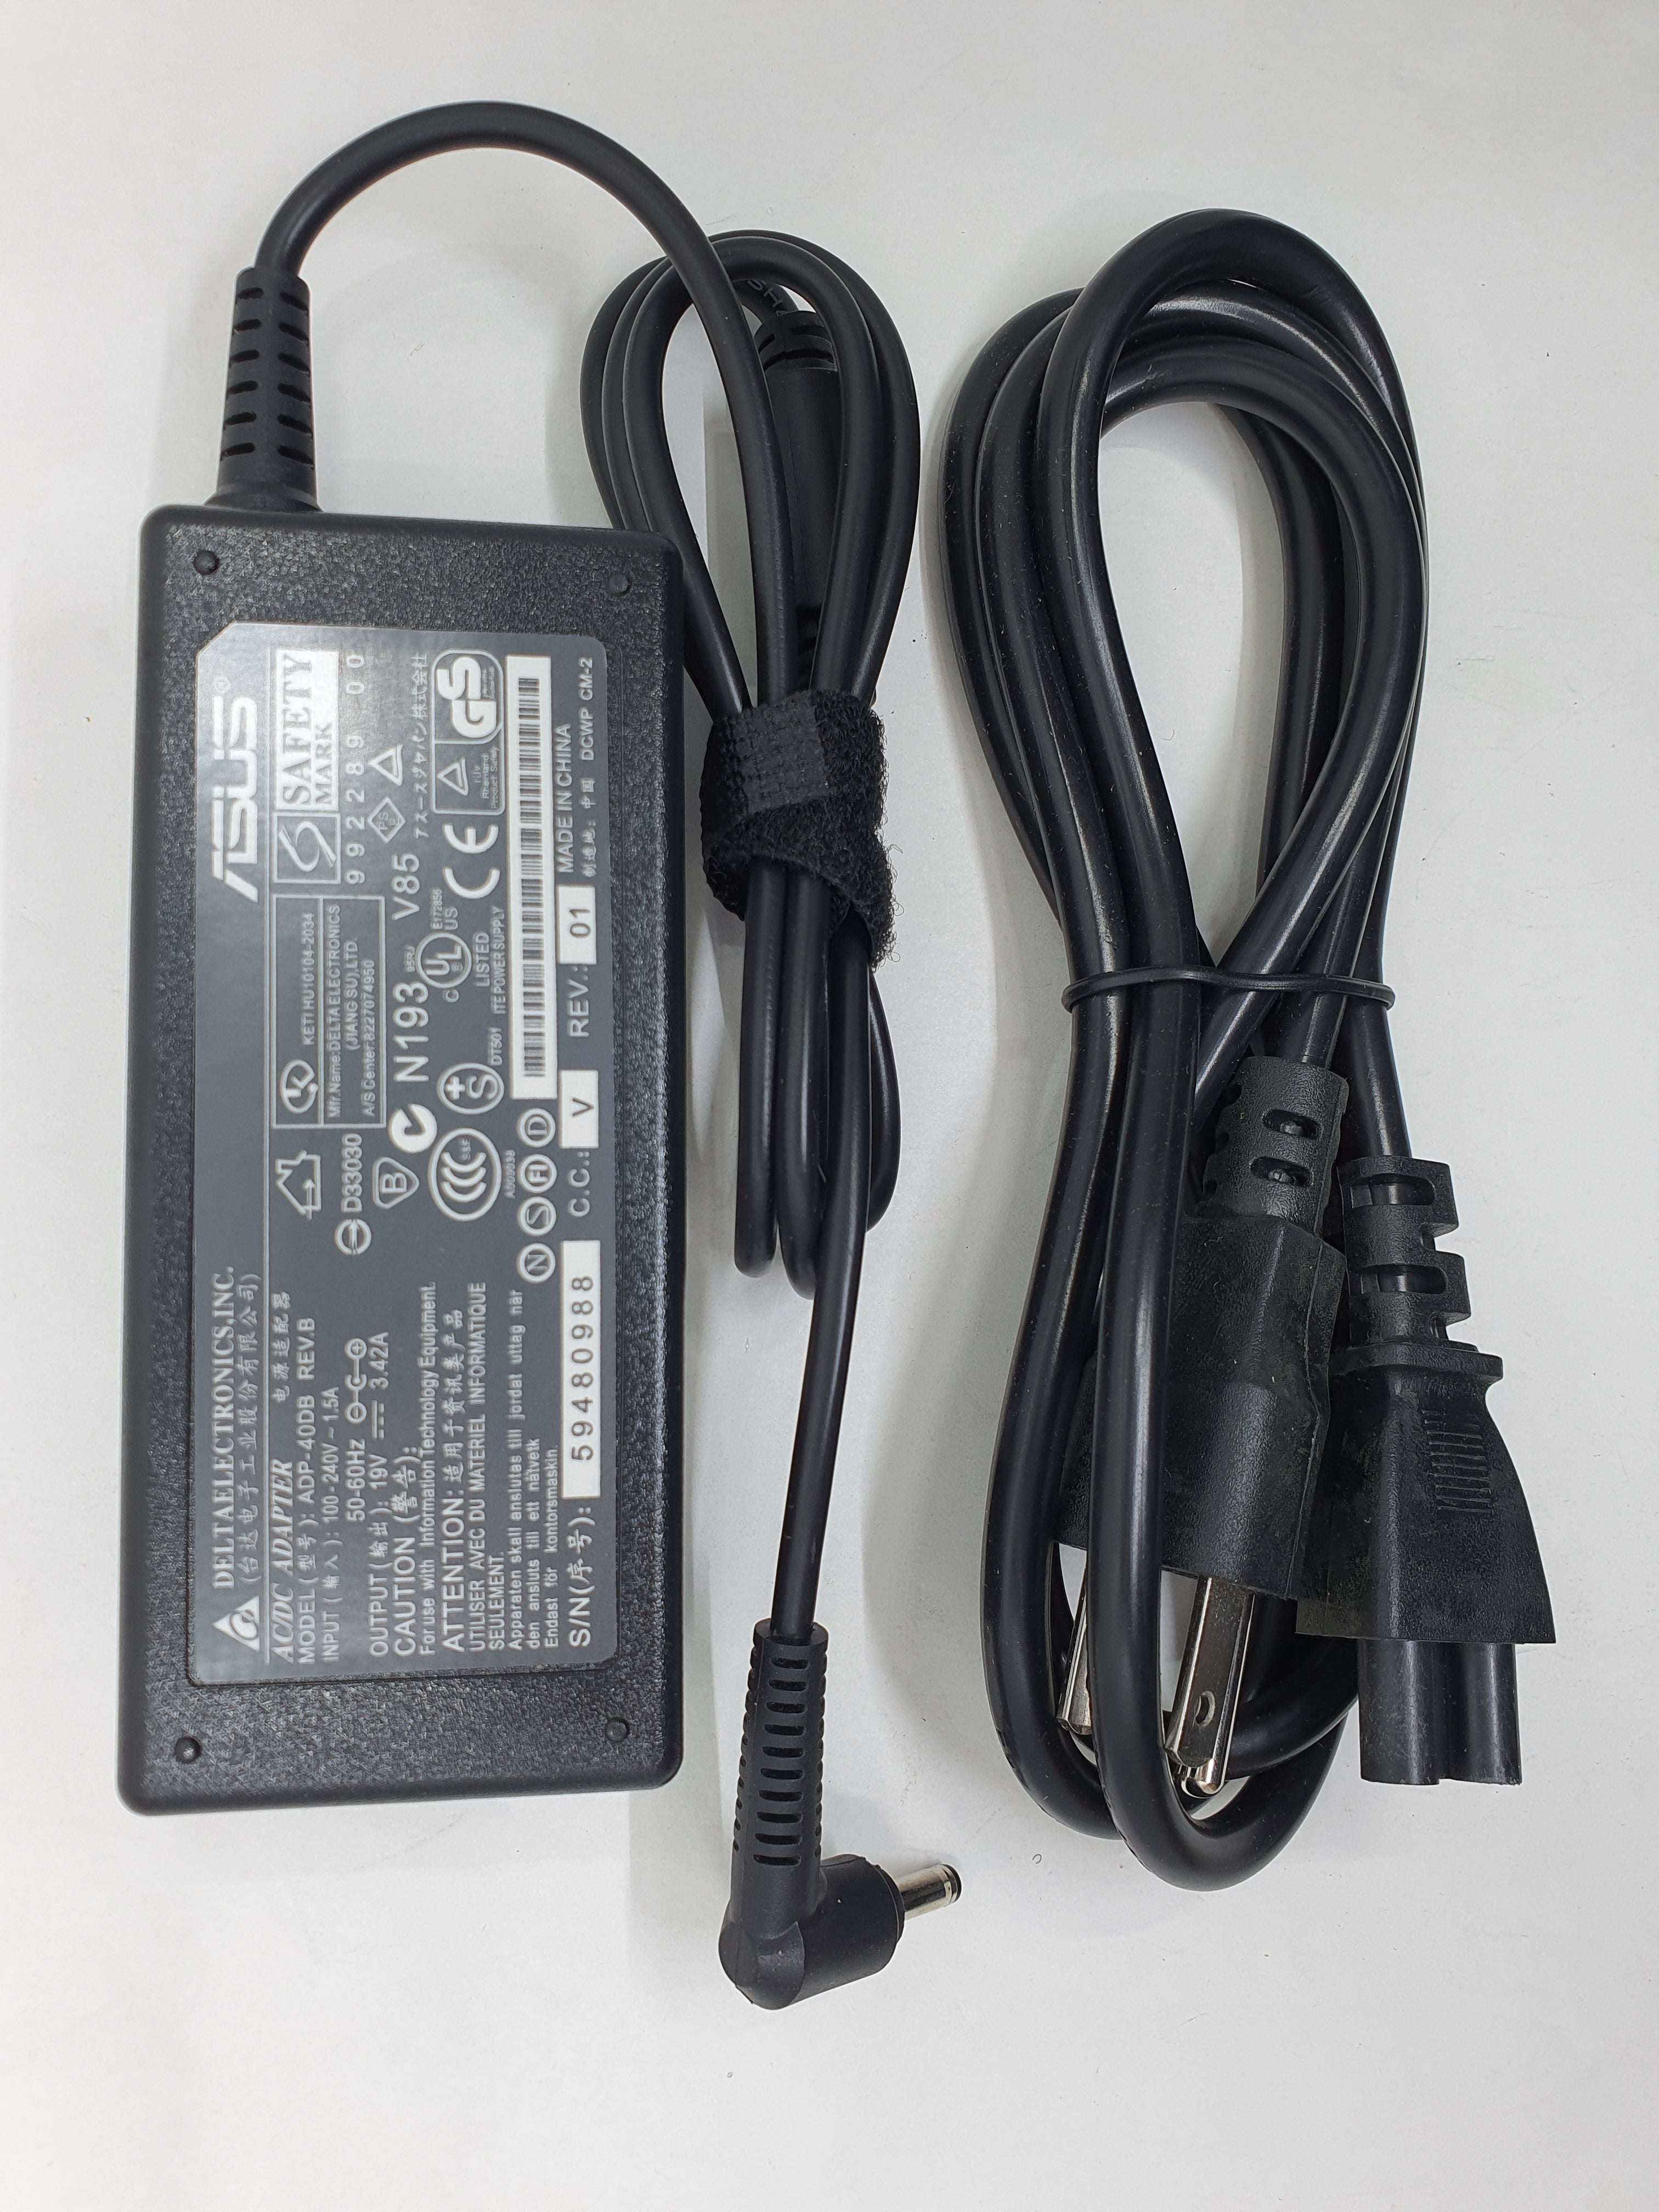 Asus Adapter 65W 19V 4.0 x 1.35 A1